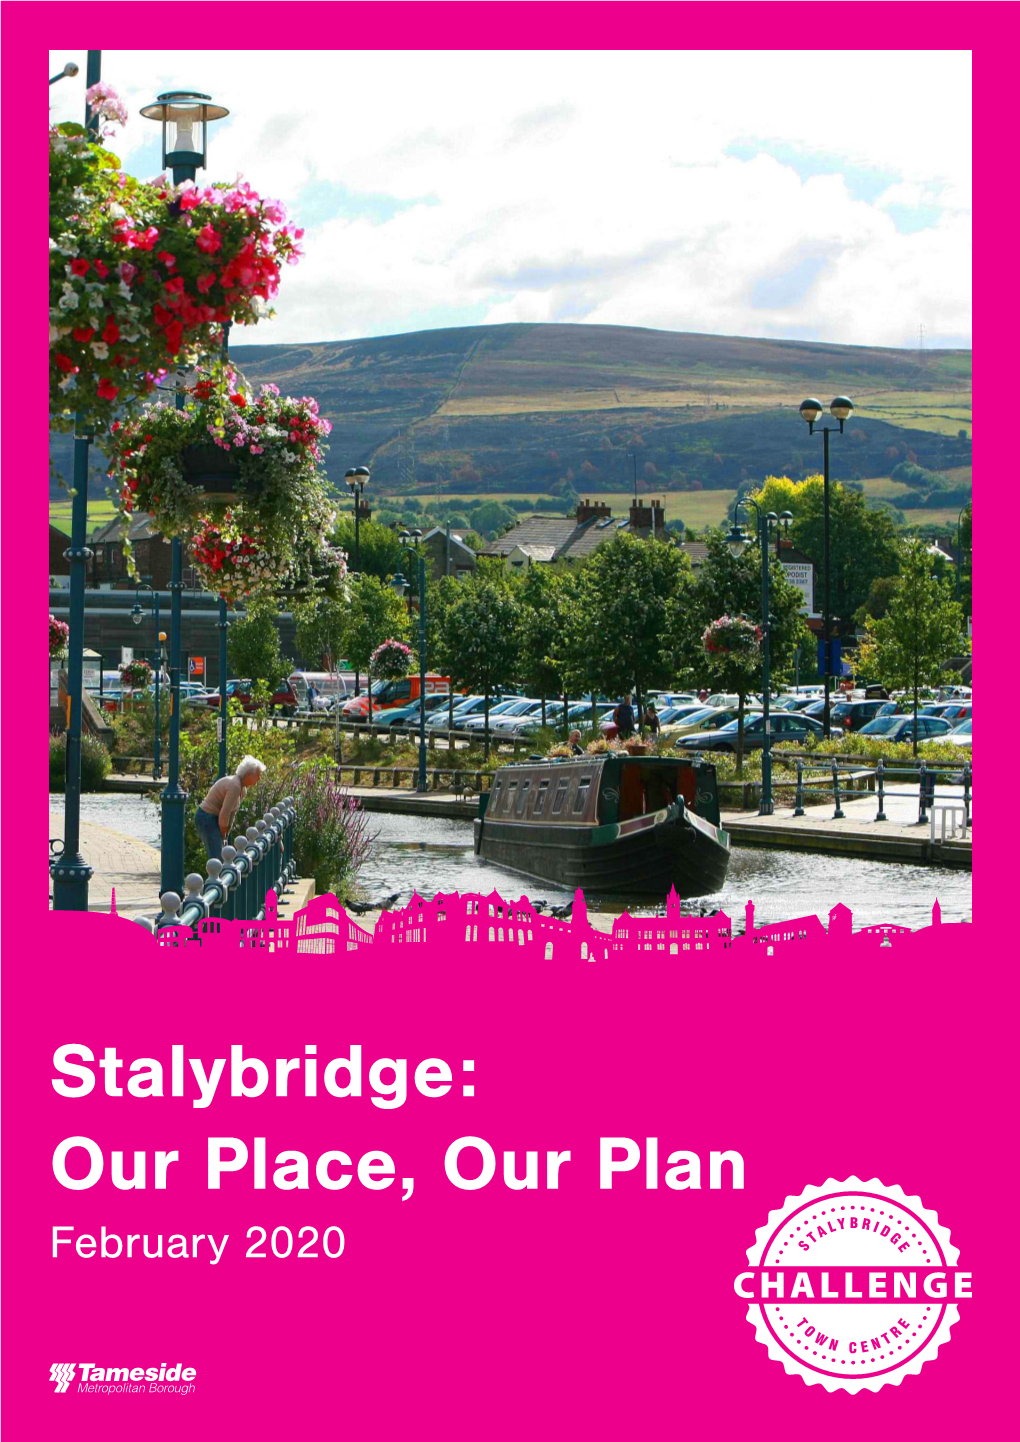 Stalybridge: Our Place, Our Plan February 2020